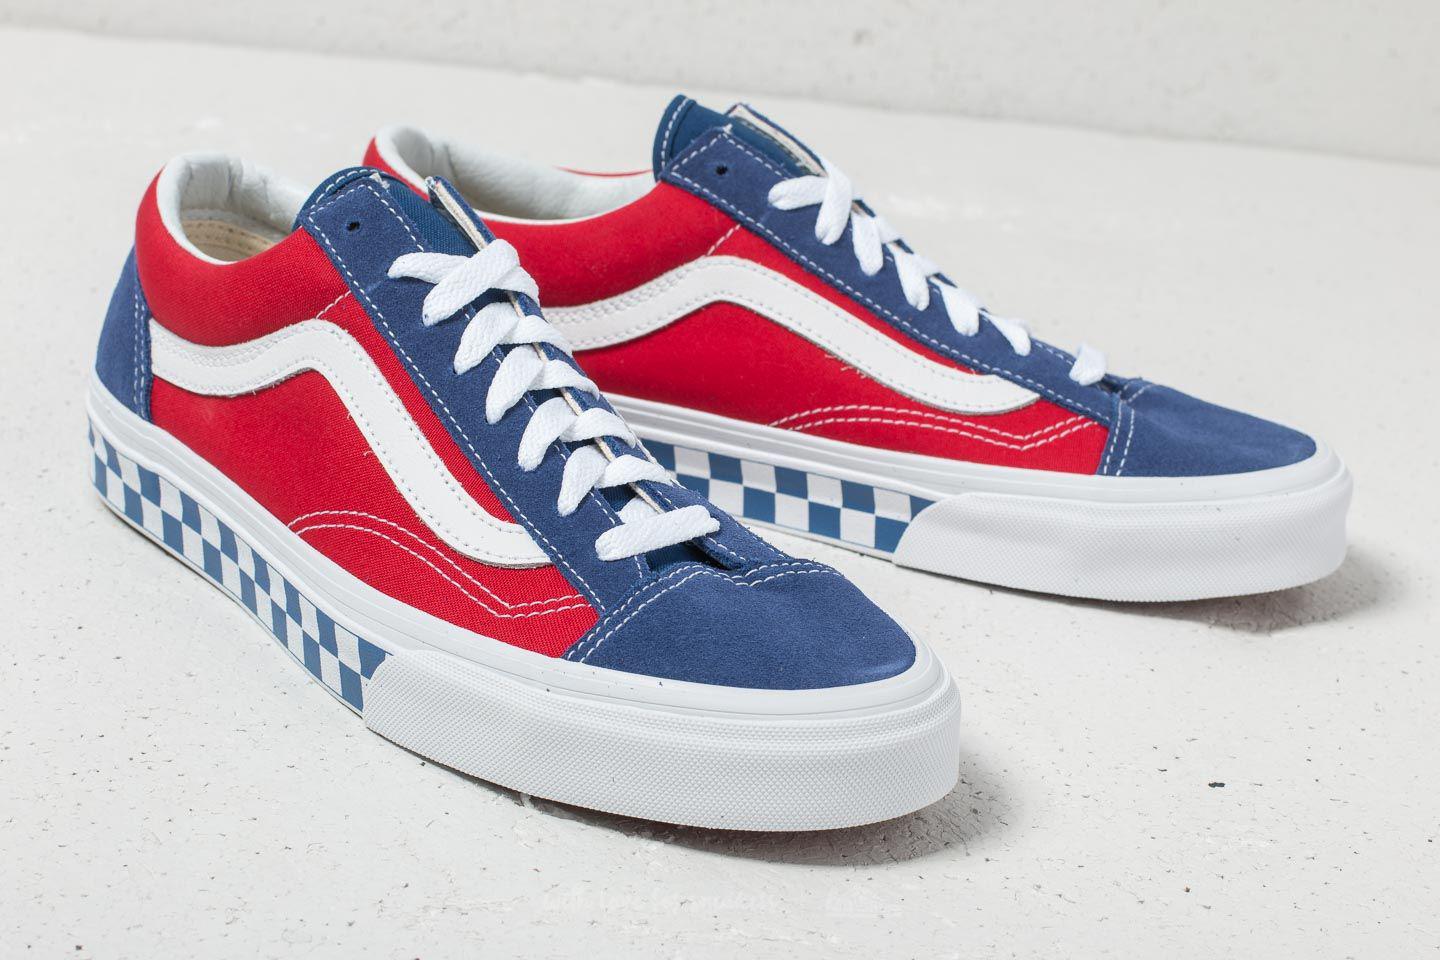 Vans Style 36 Blue Red Clearance, 56% OFF | www.fderechoydiscapacidad.es